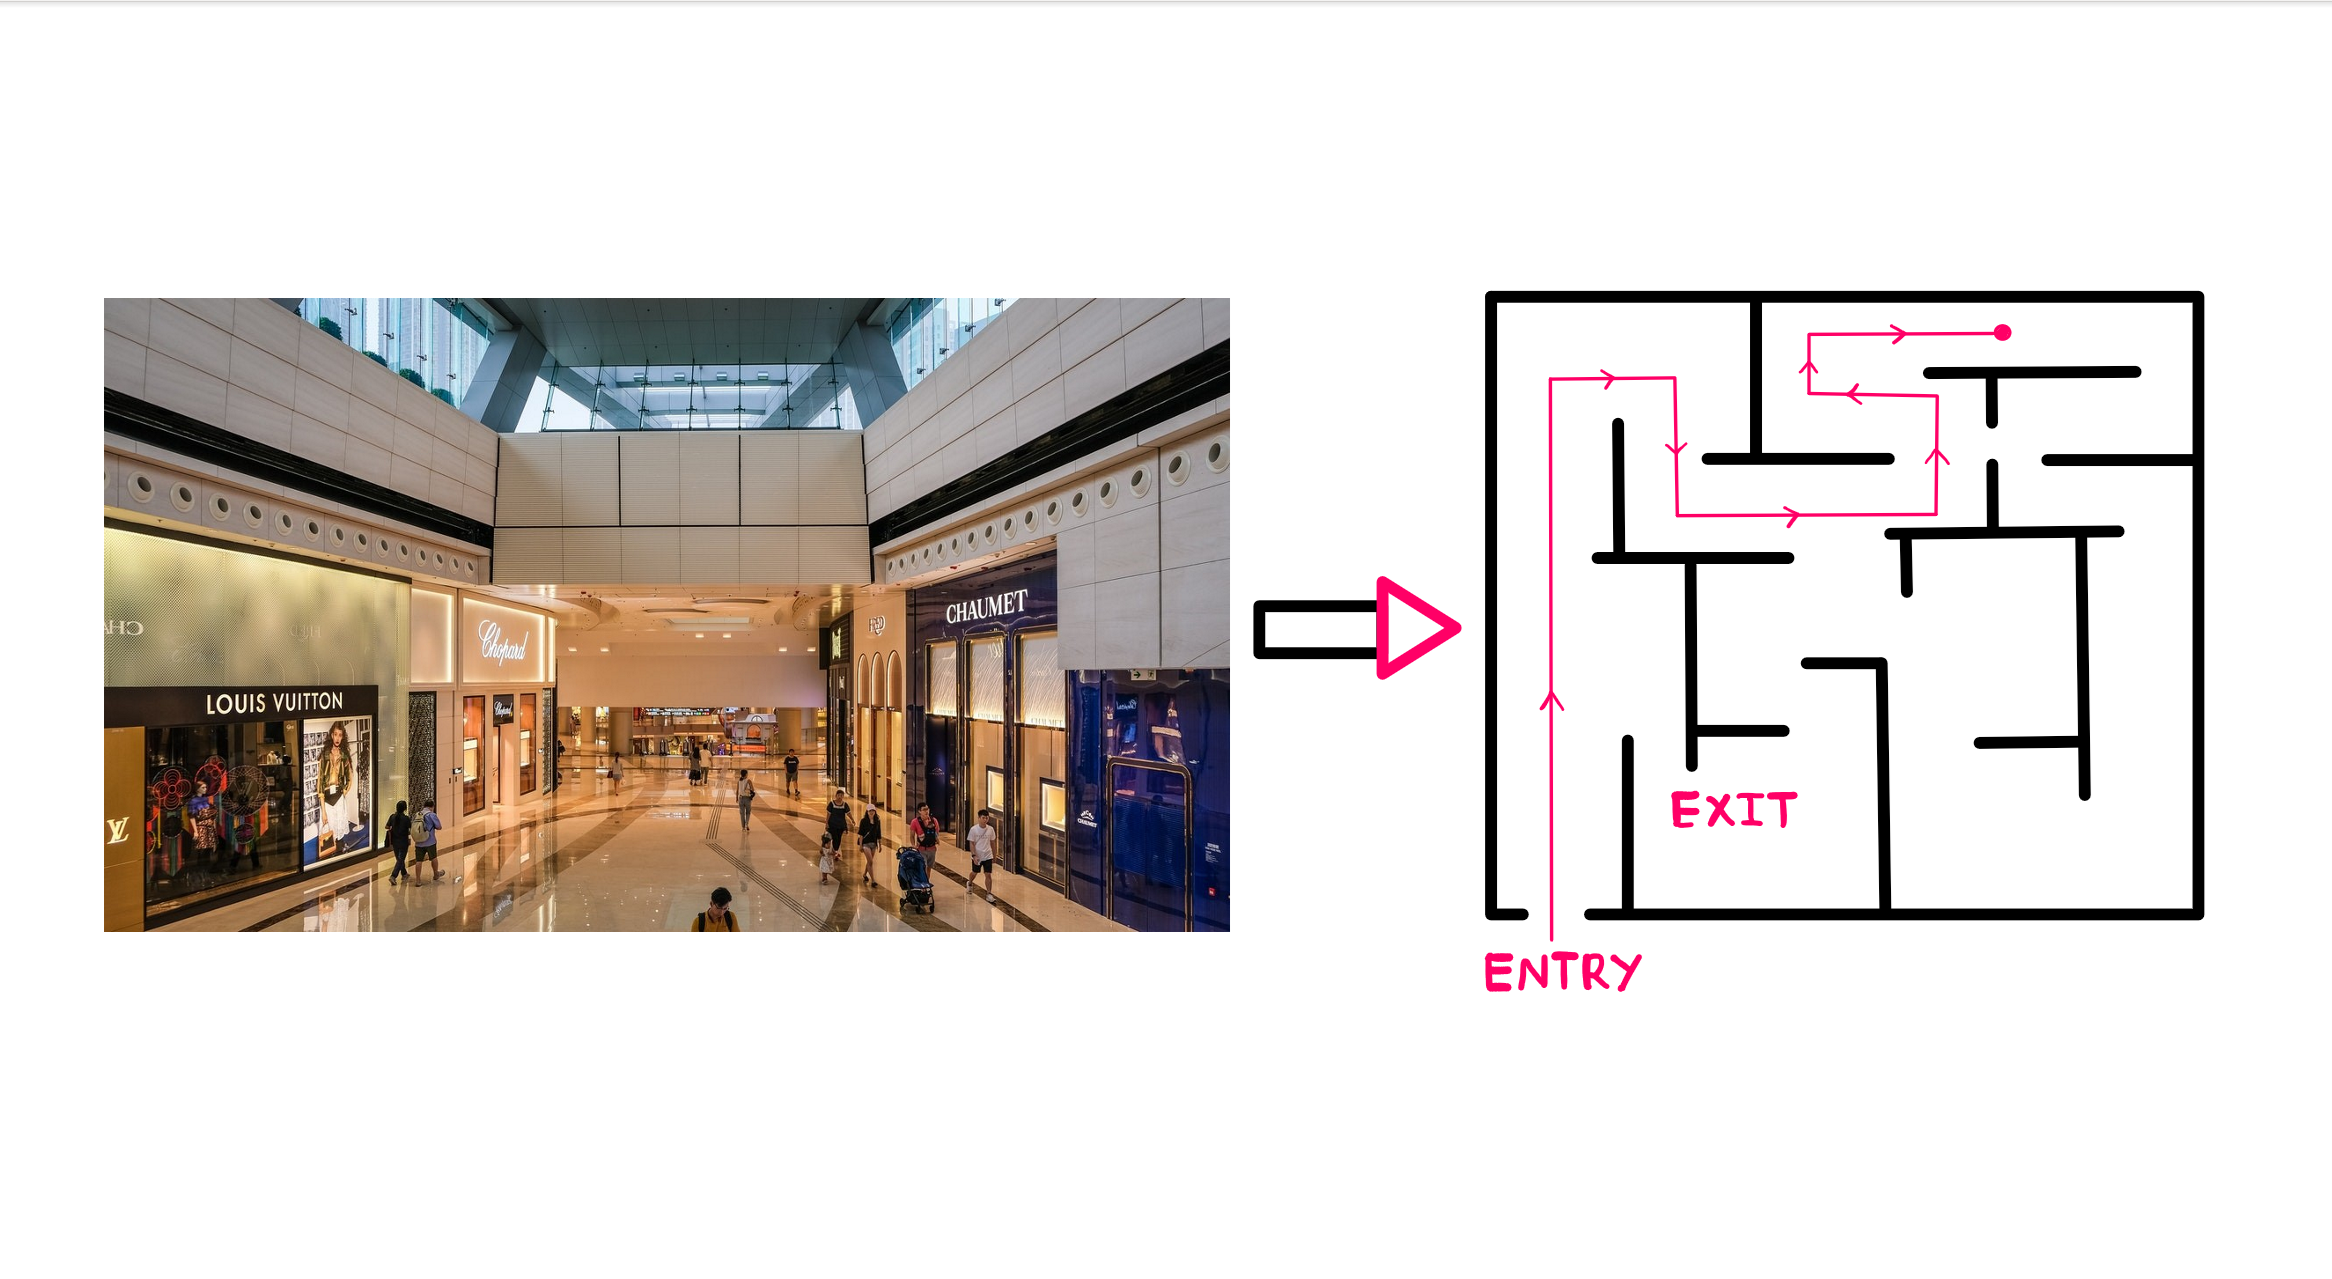 How To Really Understand Gruen Effect - An image of a shopping mall on the left. In the centre, an arrow points from left to right. On the right is an illustration of what appears to be a maze like floor plan with a path marked from entry to exit.